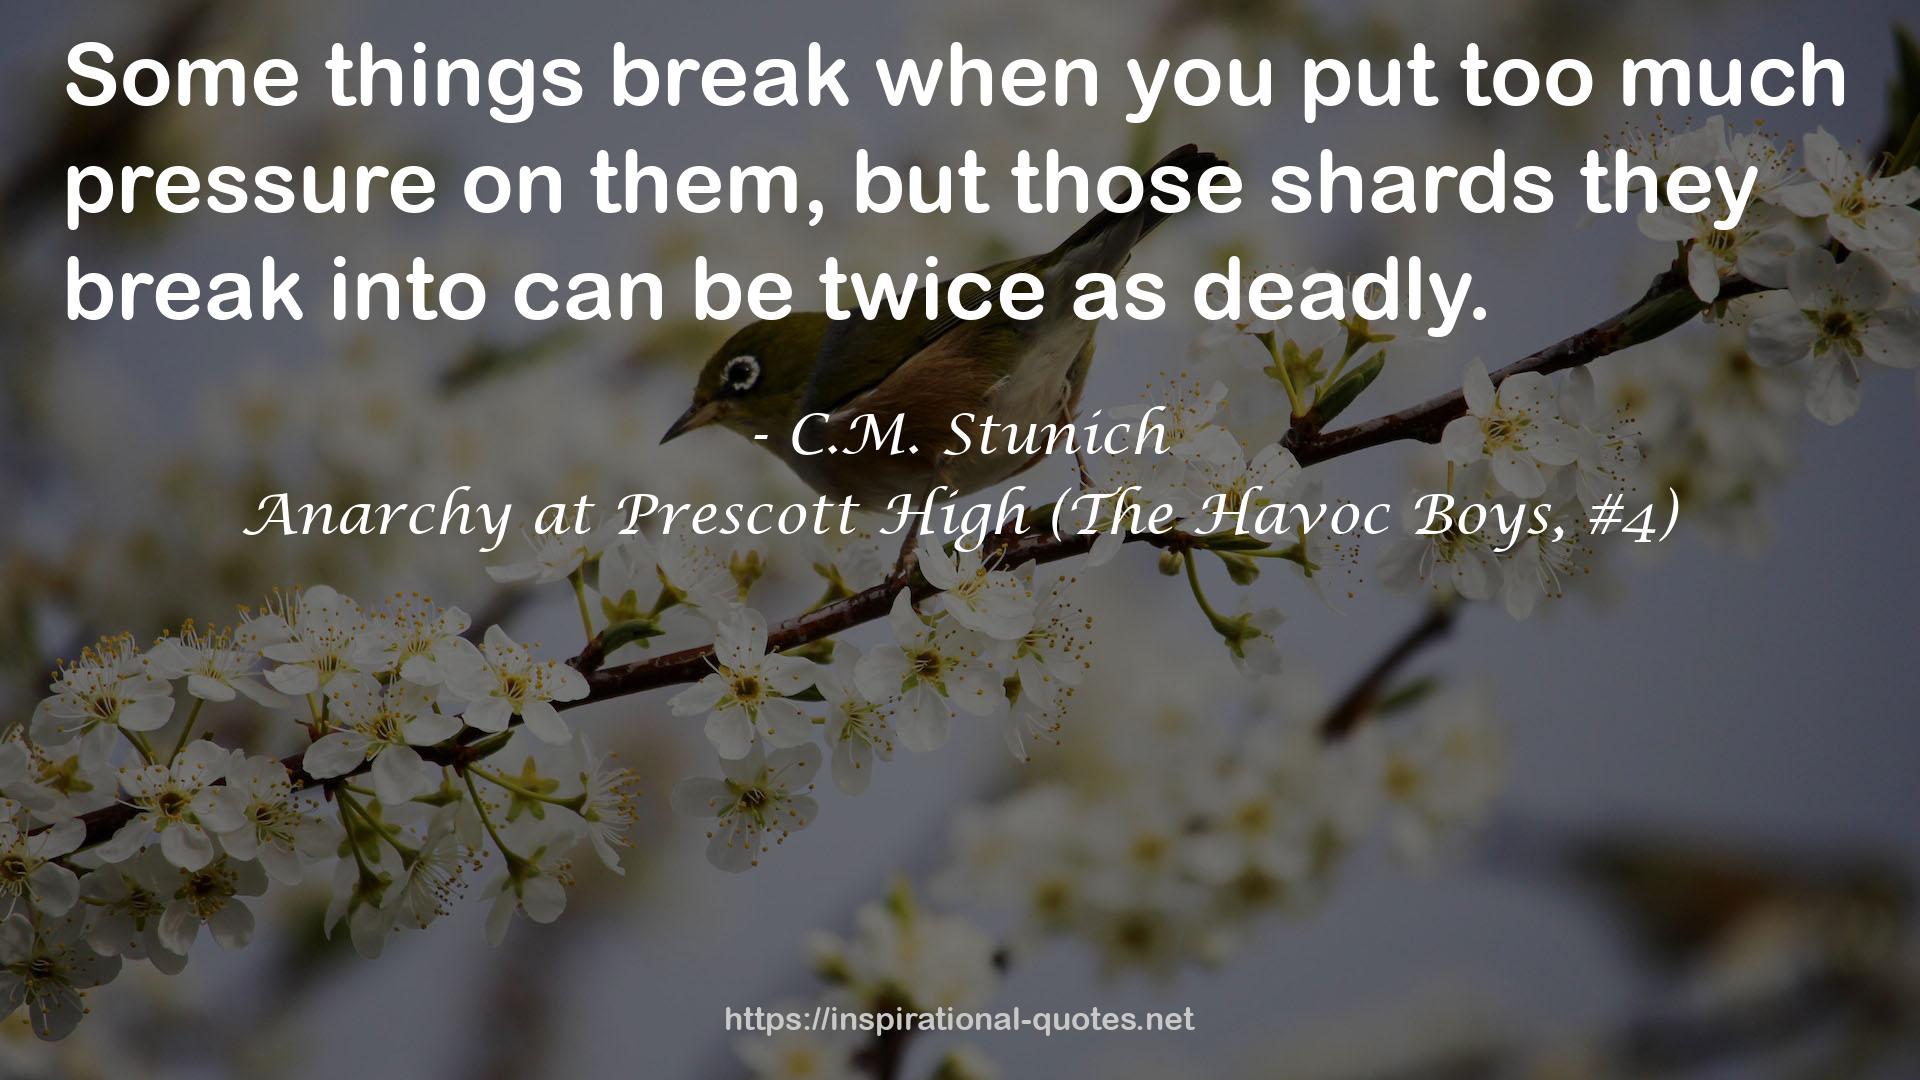 Anarchy at Prescott High (The Havoc Boys, #4) QUOTES